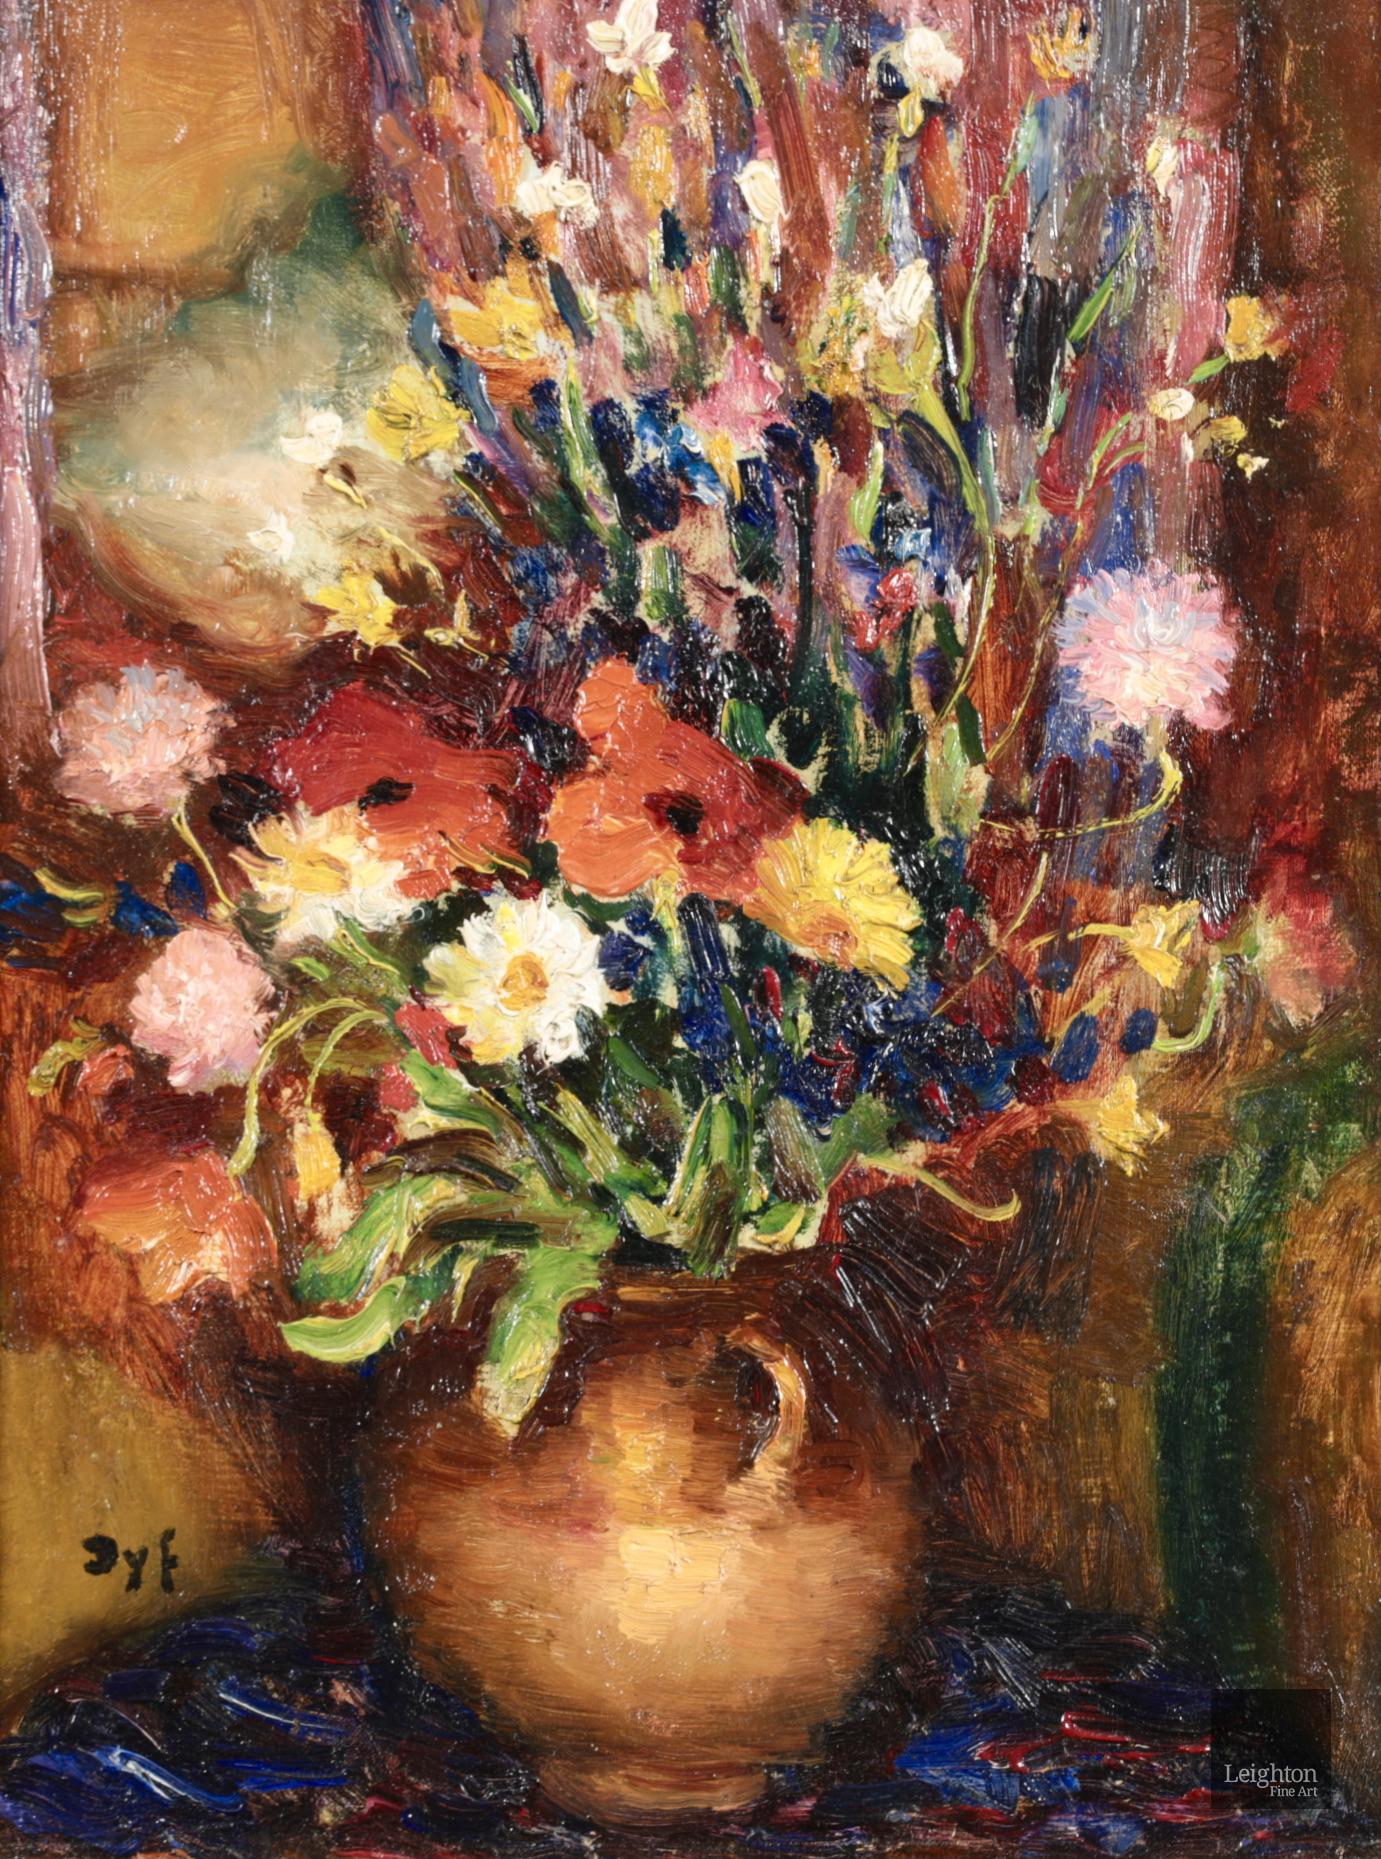 Signed post impressionist still life oil on canvas circa 1930 by sought after French impressionist painter Marcel Dyf. The work depicts wildflowers in a glazed vase. A wonderful piece.

Signature:
Signed lower left

Dimensions:
Framed: